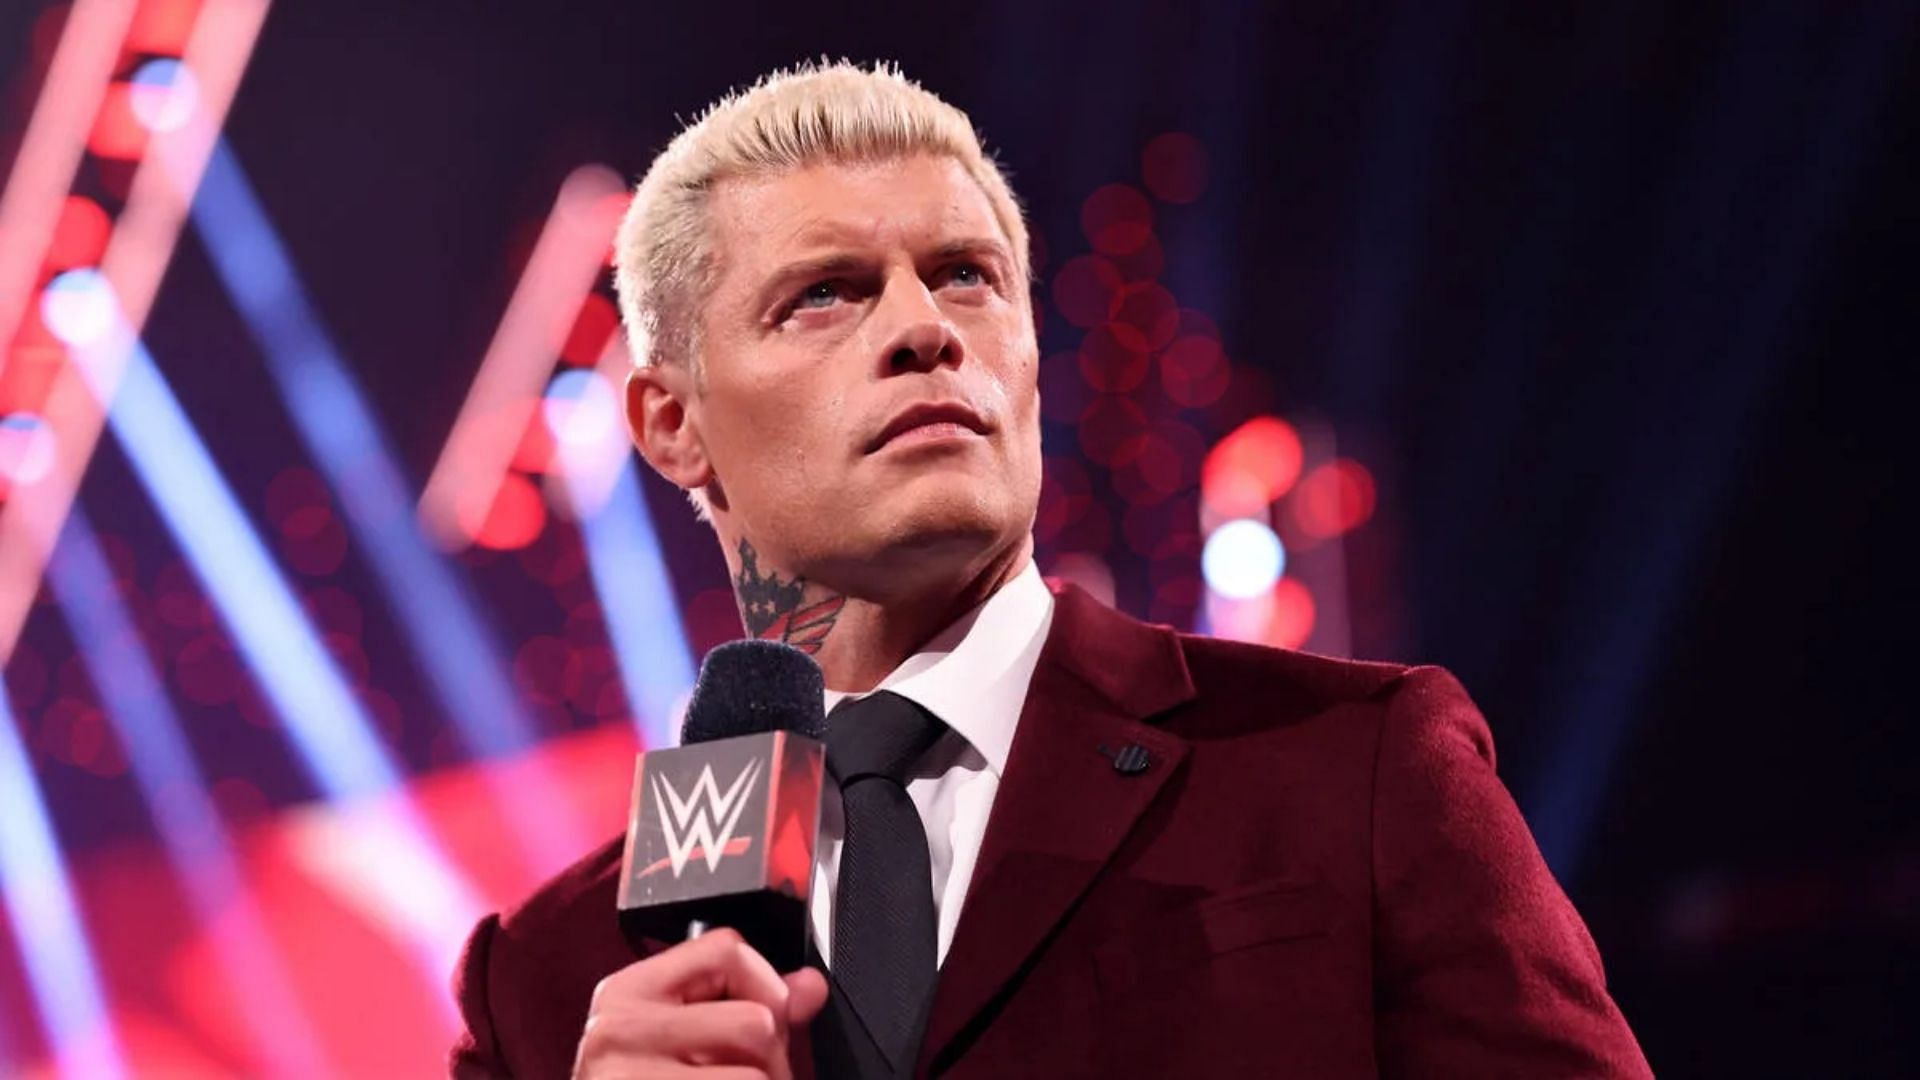 Cody Rhodes is set to face Roman Reigns at WrestleMania 39